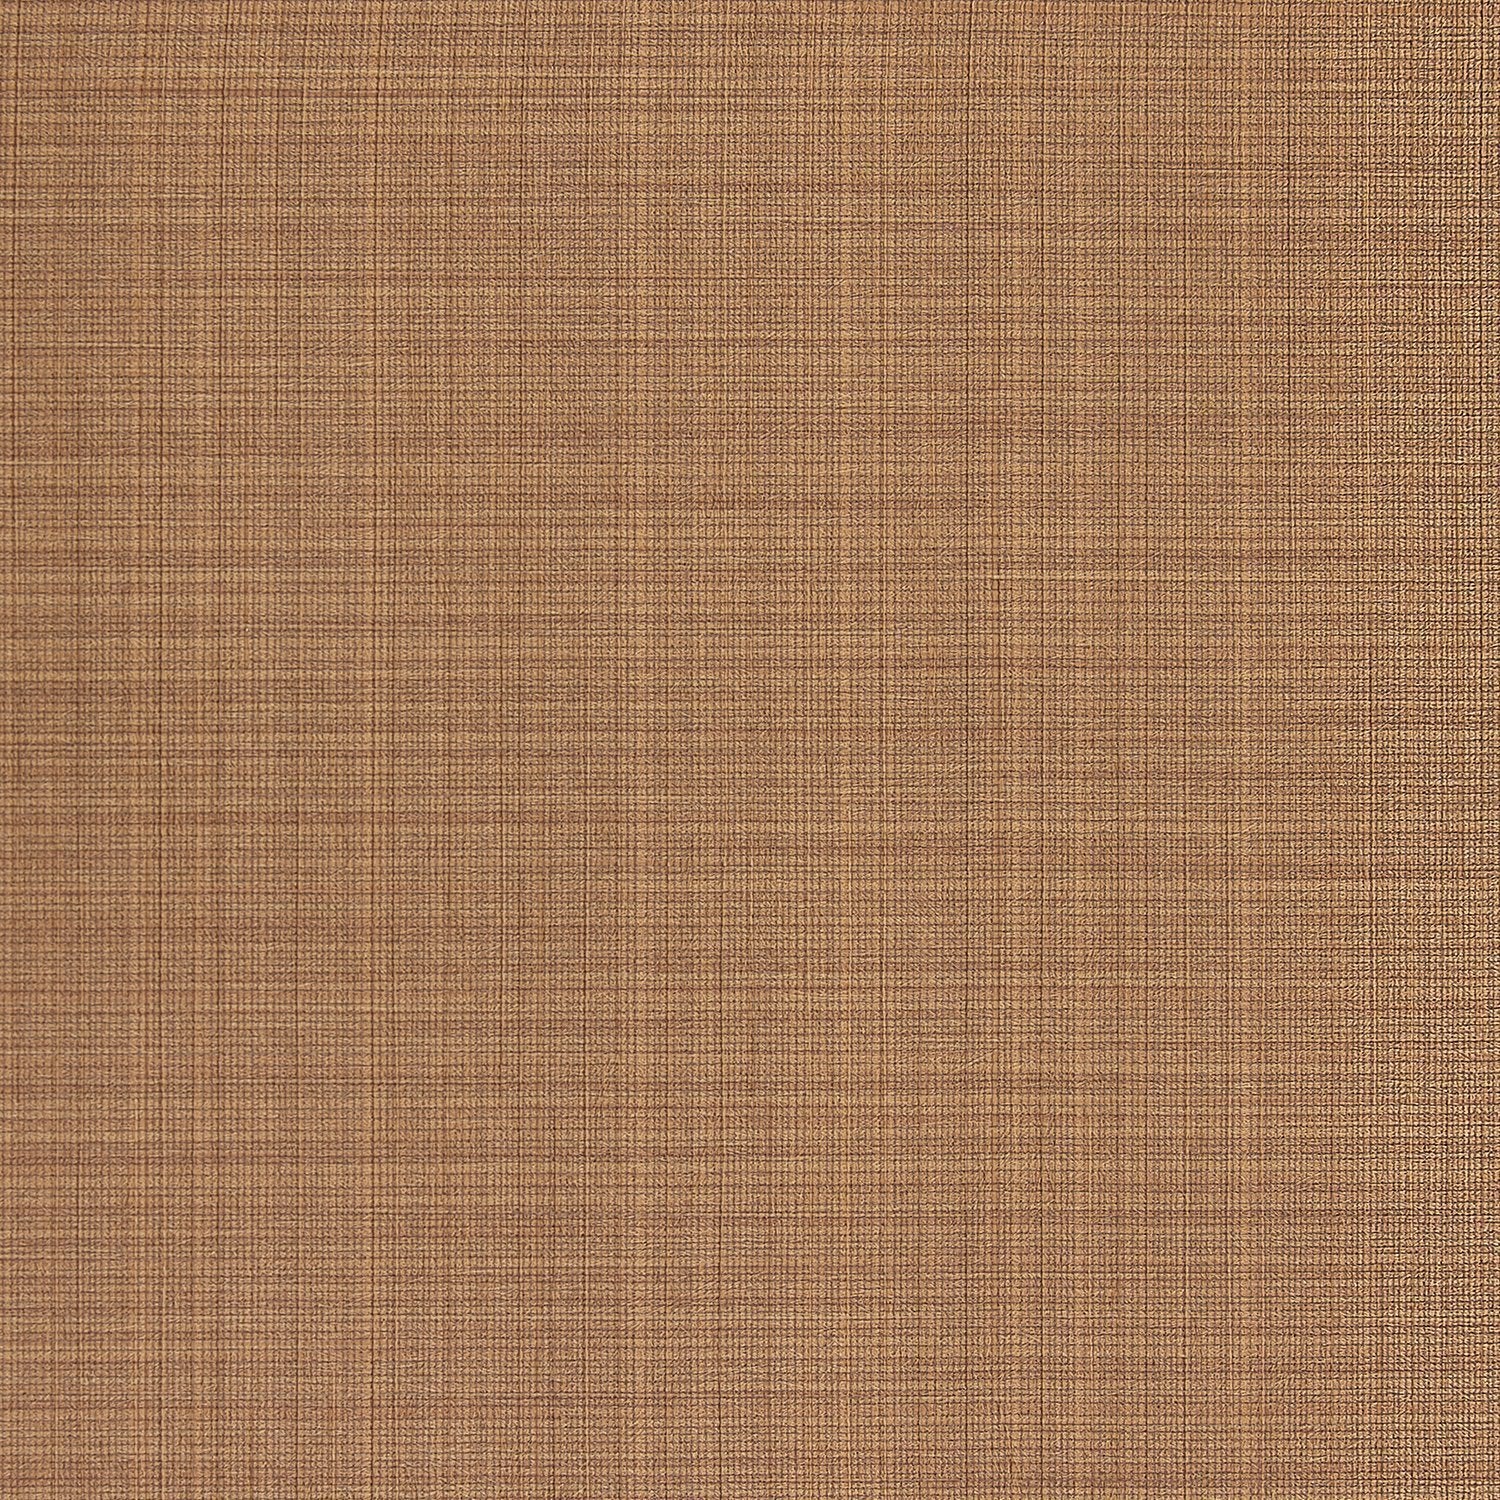 Angles Silk - Y47599 - Wallcovering - Vycon - Kube Contract